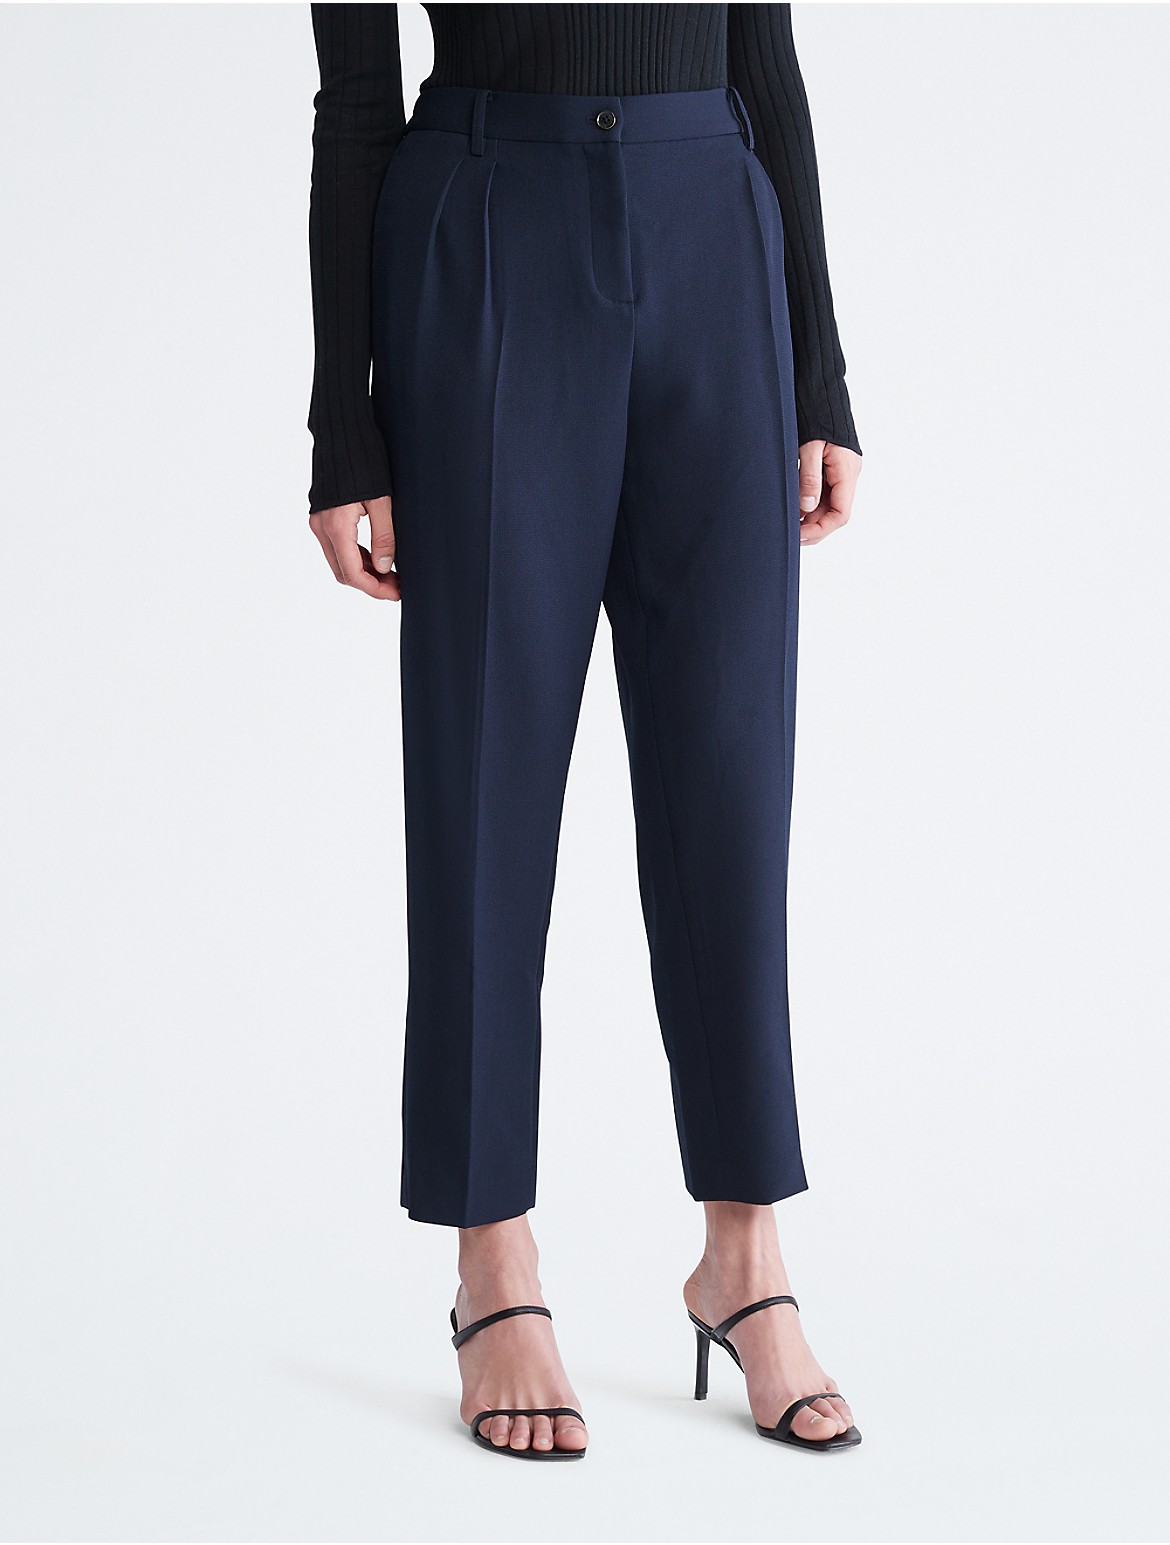 Calvin Klein Women's Pleated Ankle Length Tailored Pants - Blue - 14